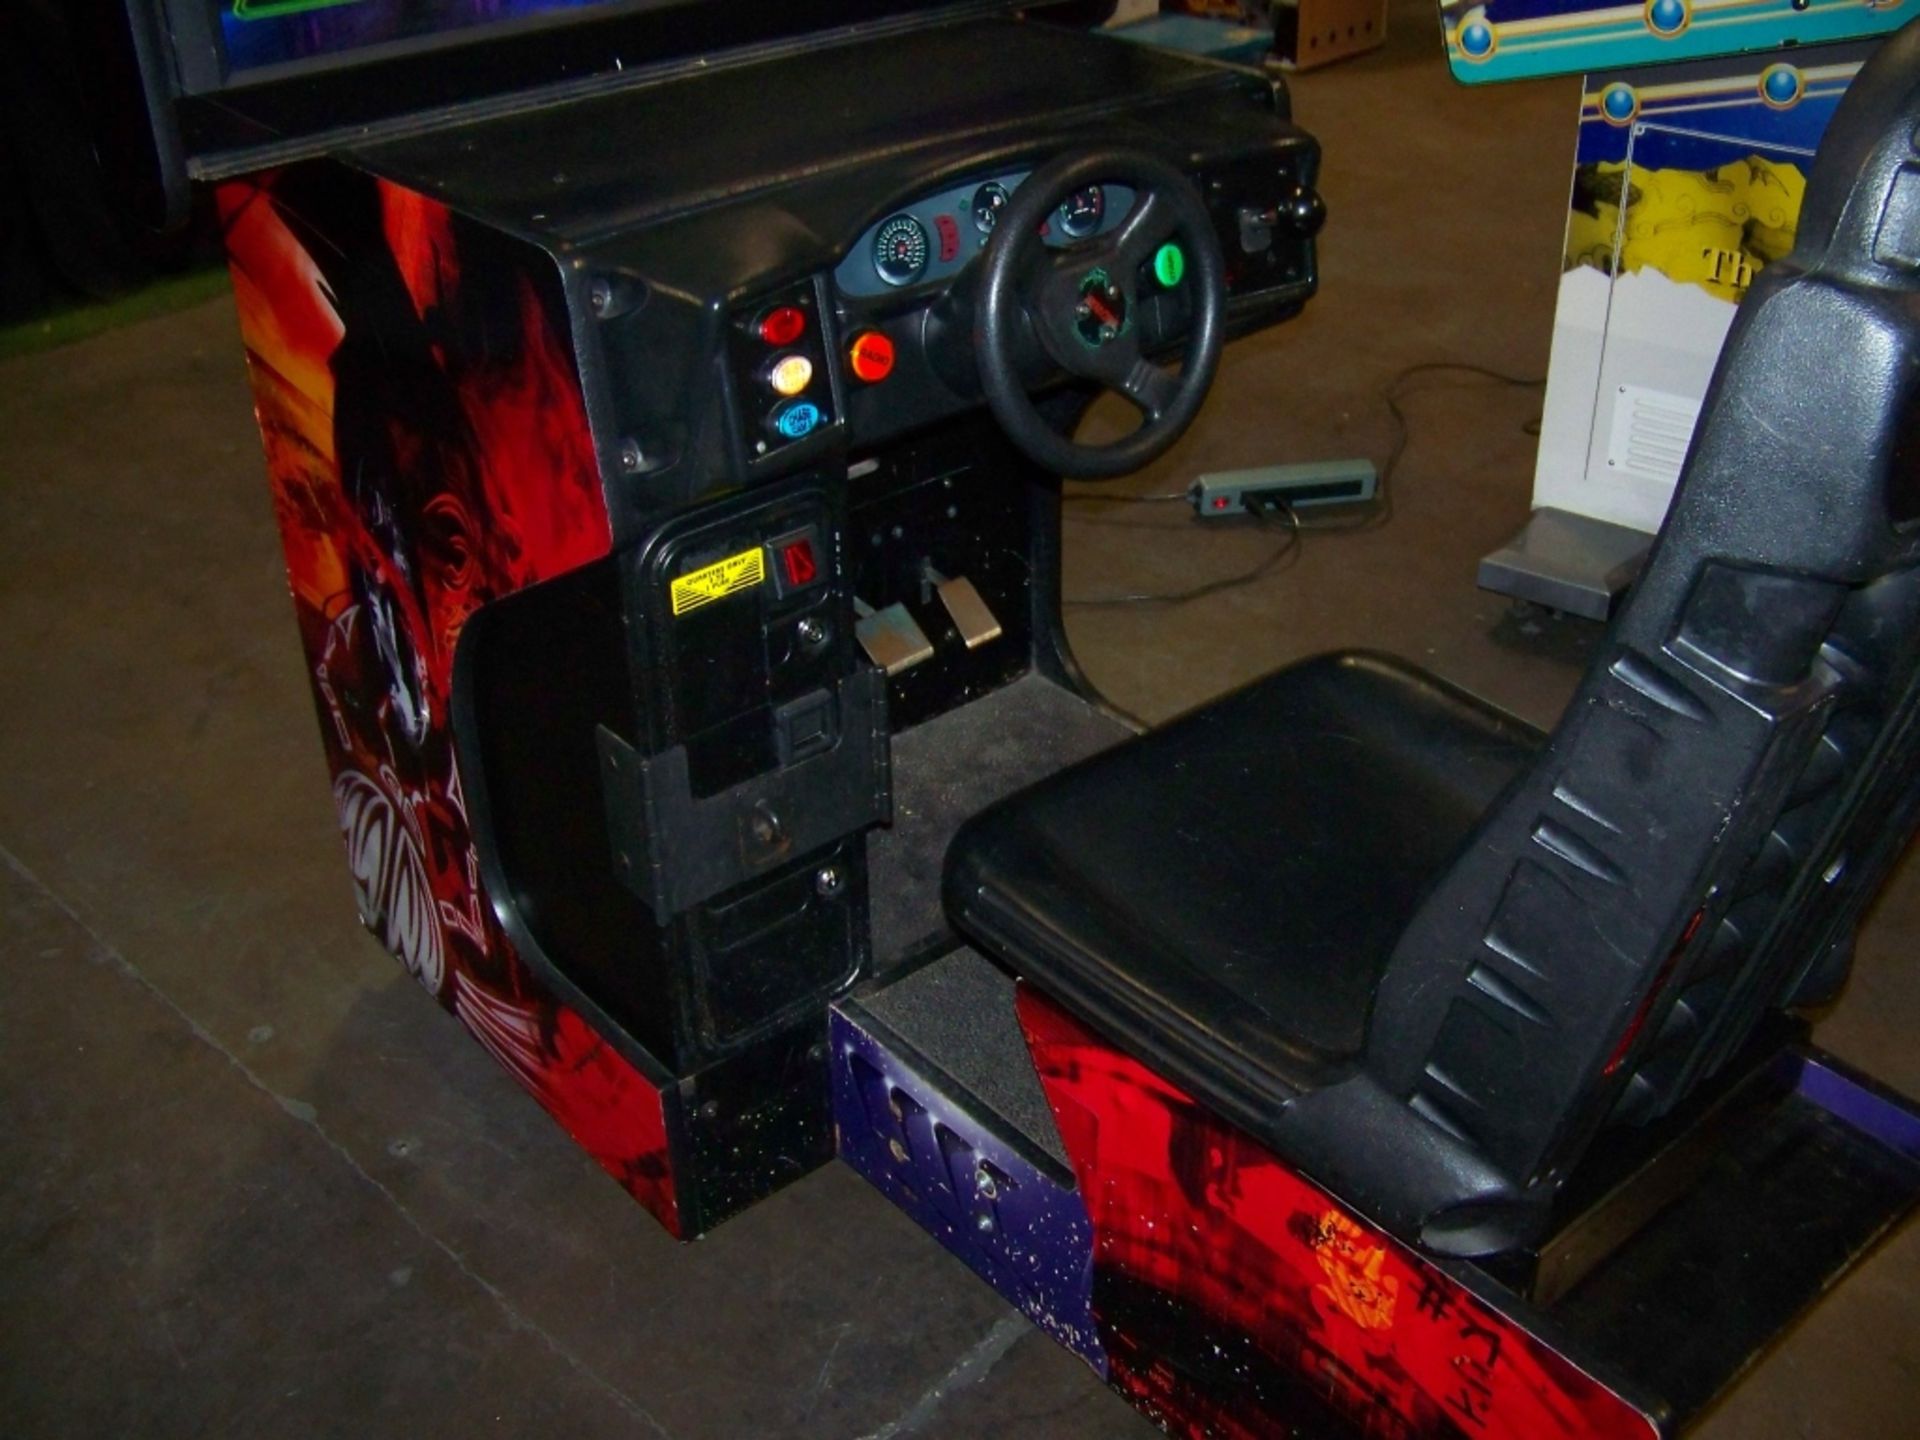 DRIFT FAST & FURIOUS DX 42" LCD RACING ARCADE GAME - Image 4 of 6